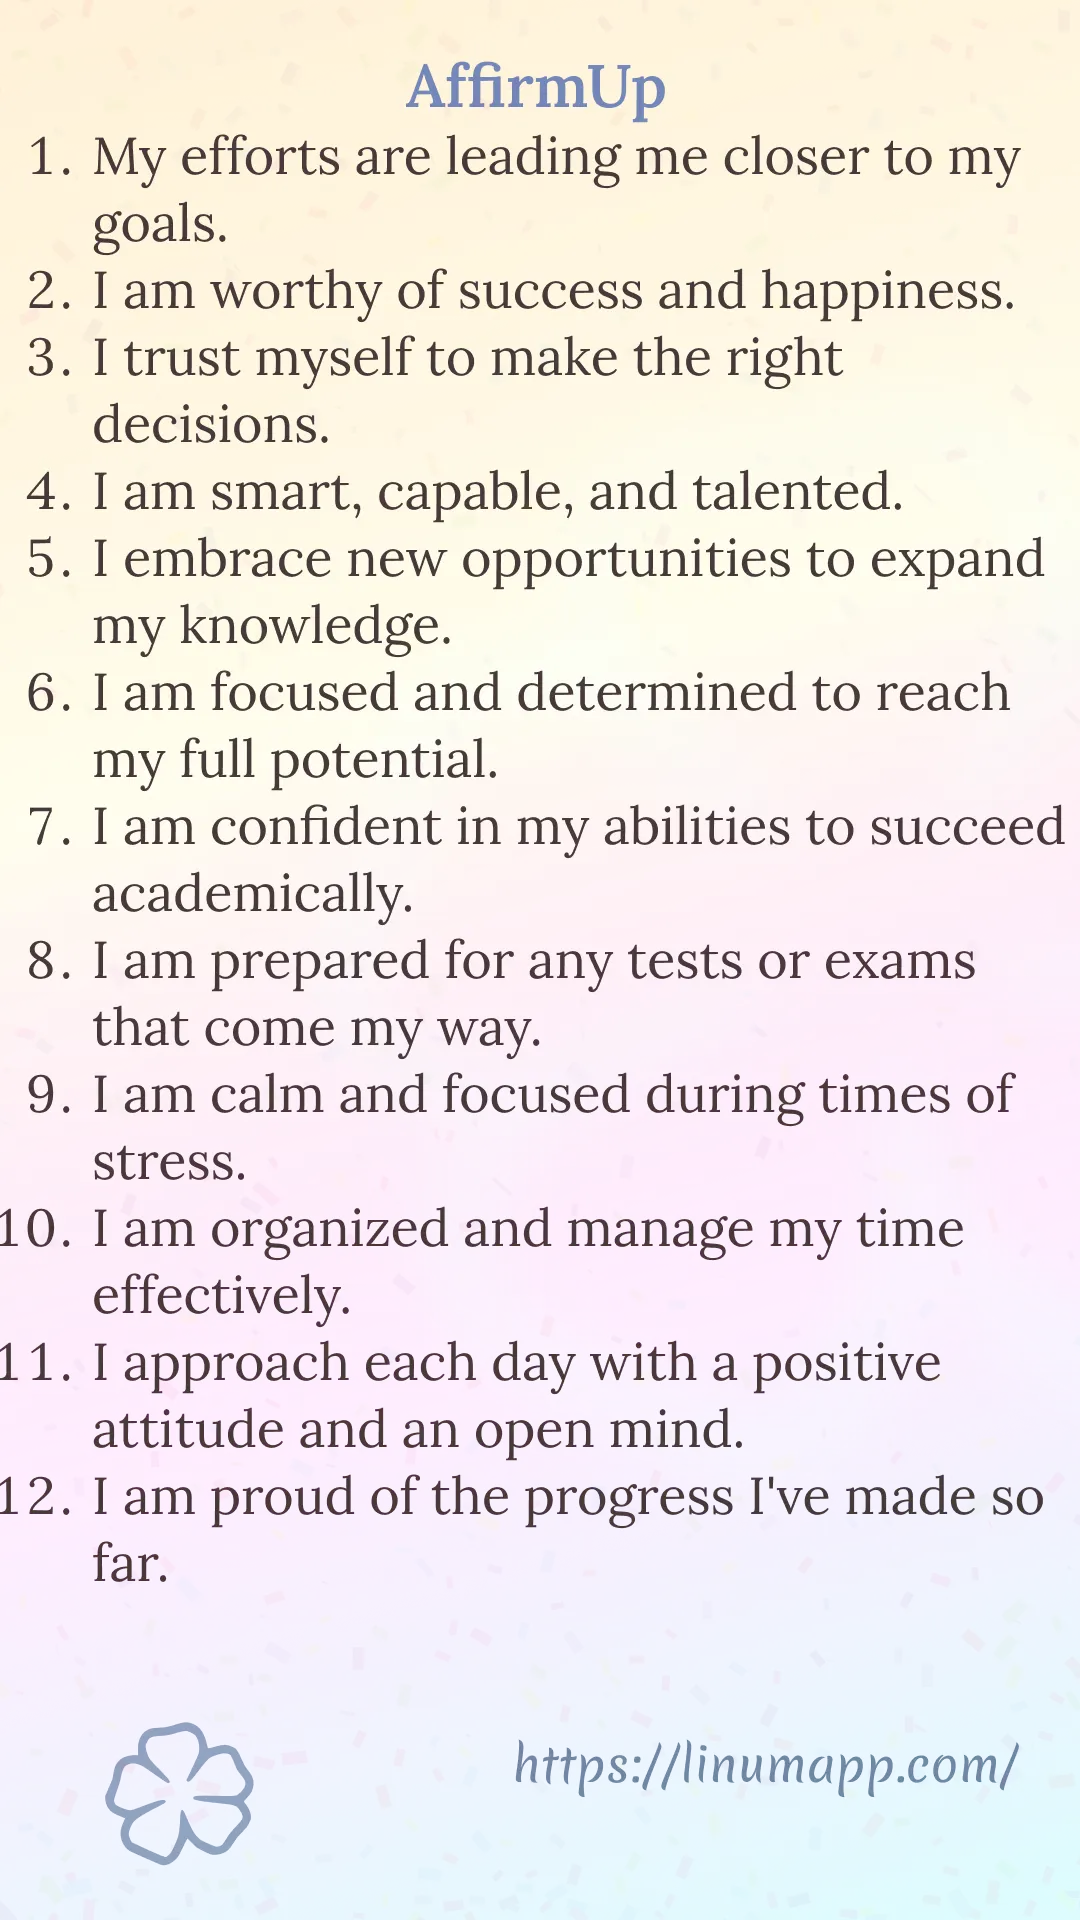 100 Positive I Am Affirmations for Students